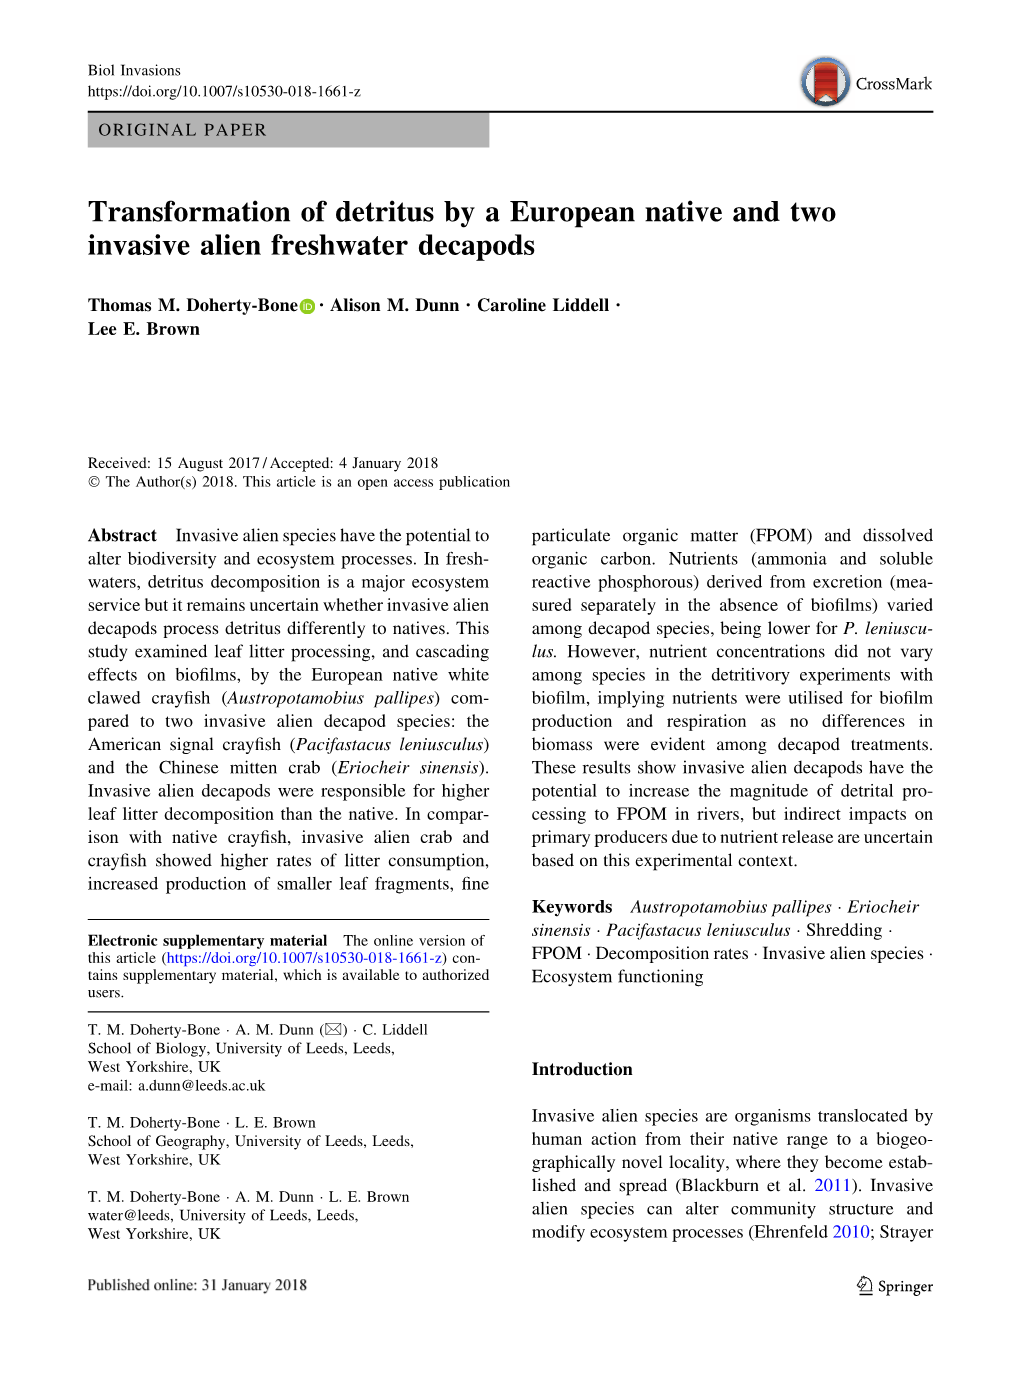 Transformation of Detritus by a European Native and Two Invasive Alien Freshwater Decapods